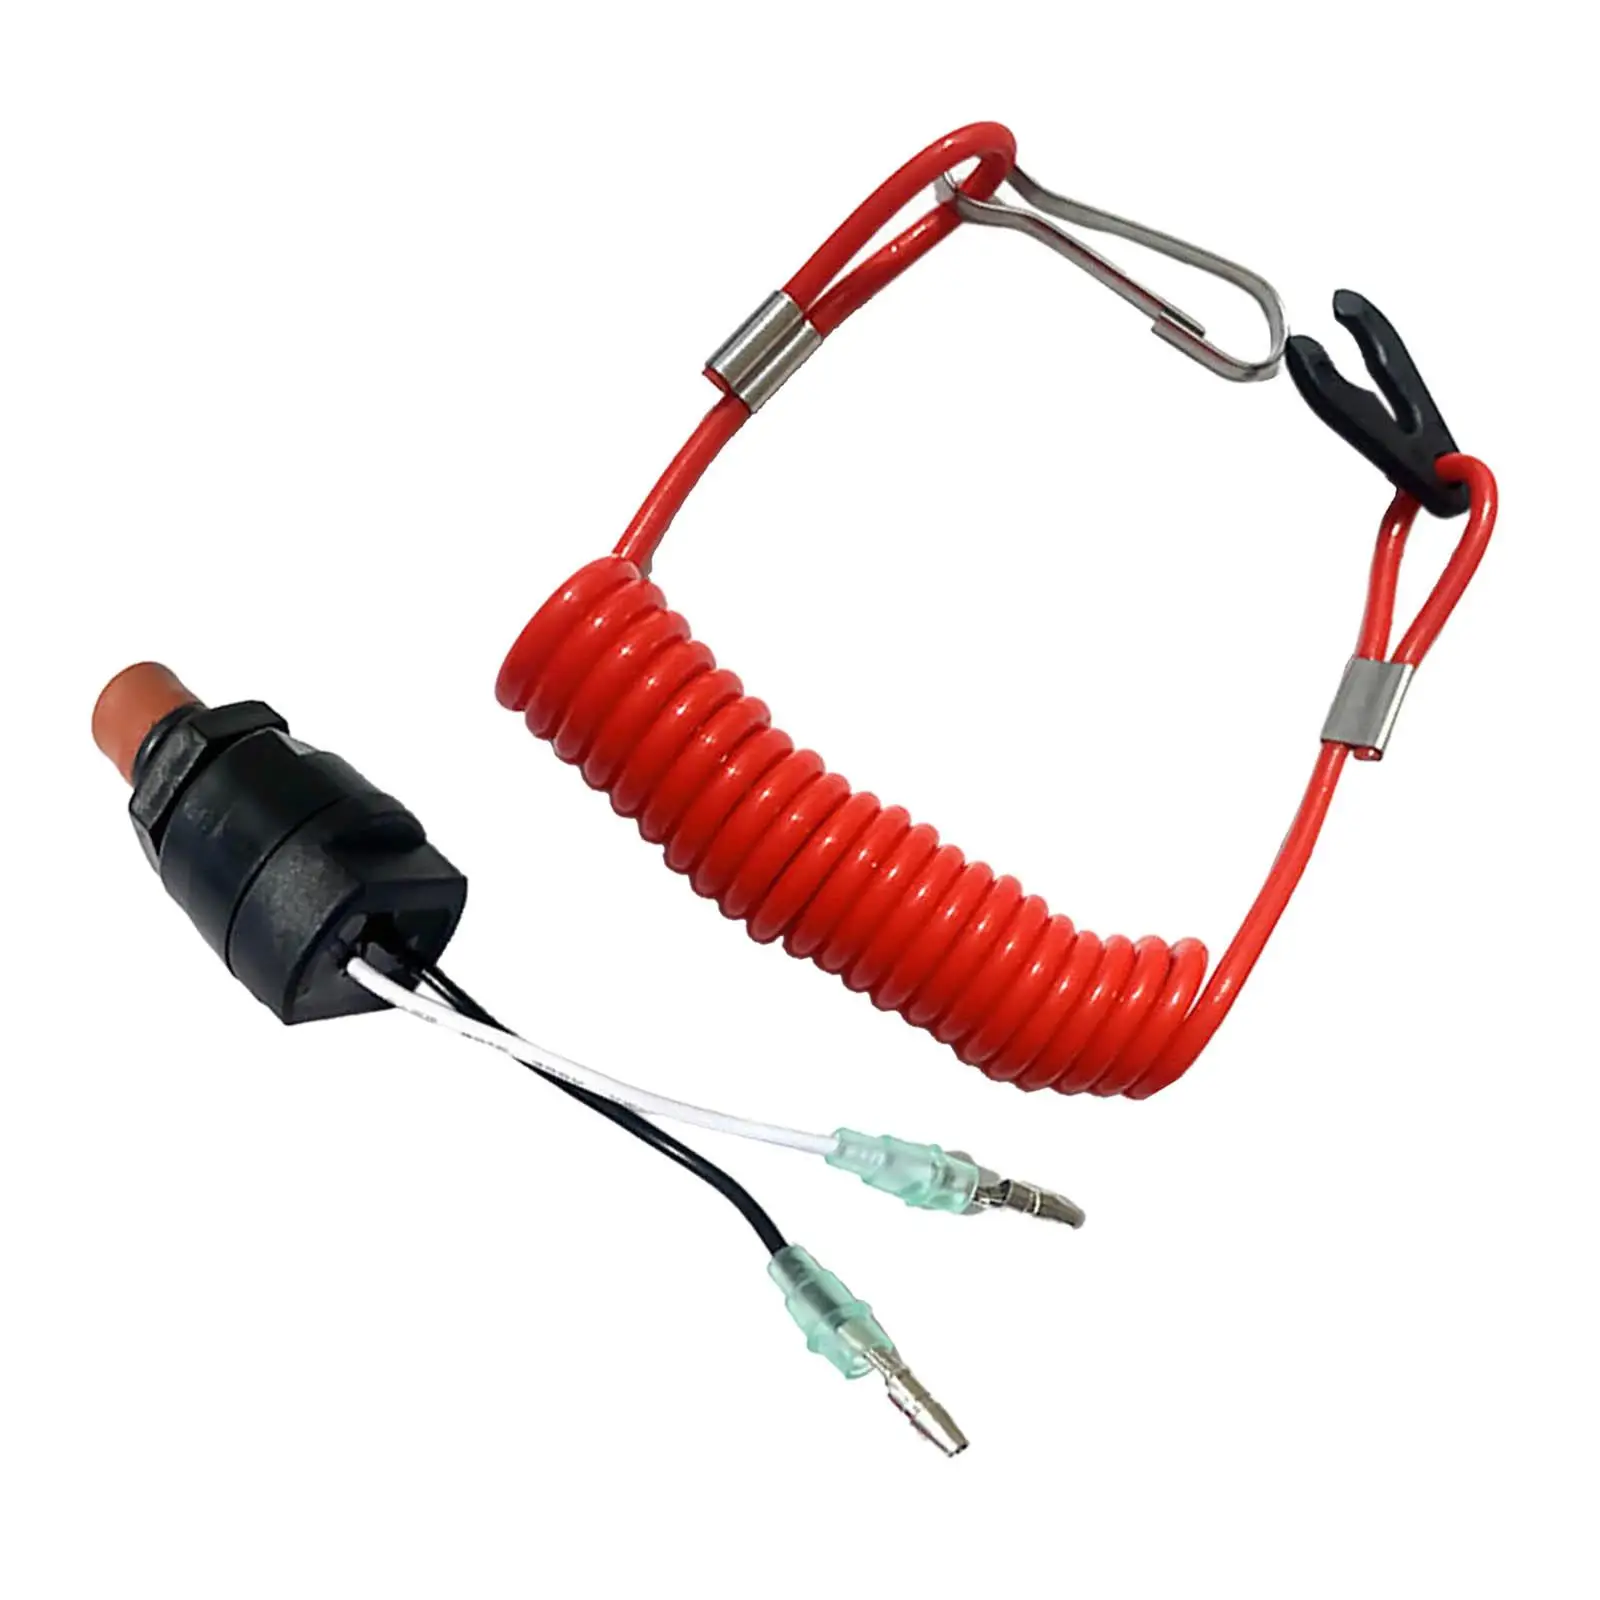 Boat Motor Emergency Kill Switch W/ Tether Cord Fit for Honda Spring Cord